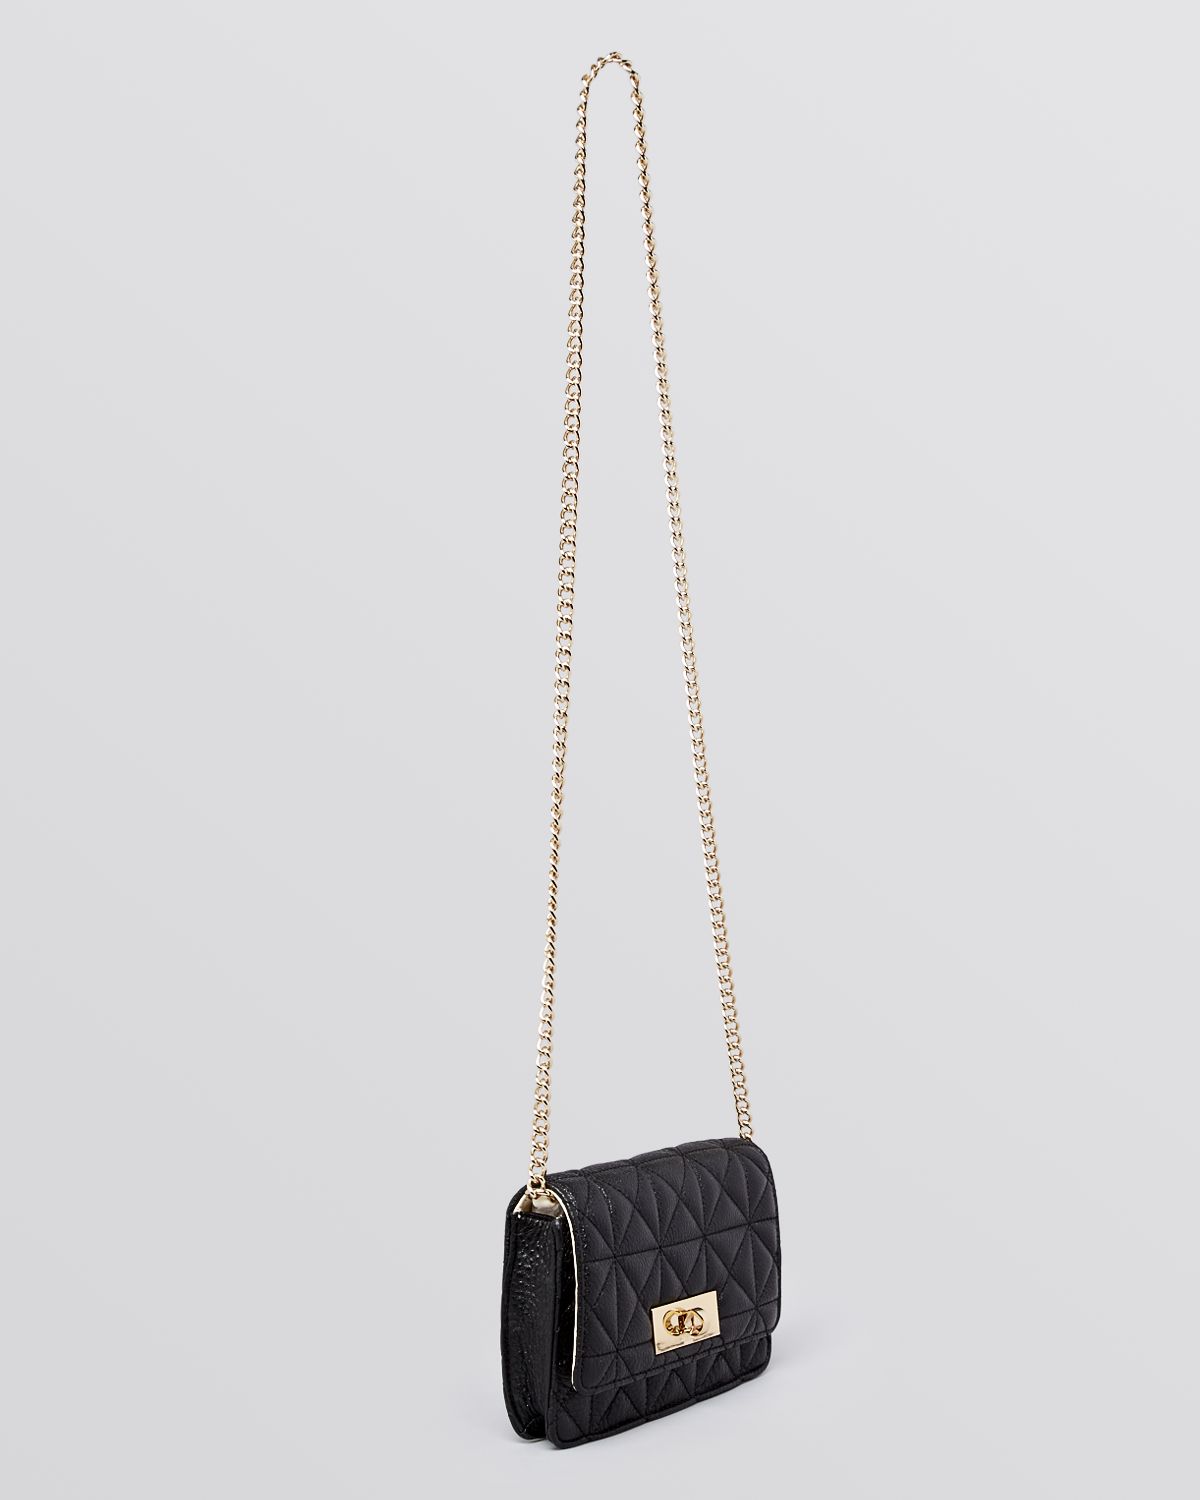 kate spade black crossbody with chain